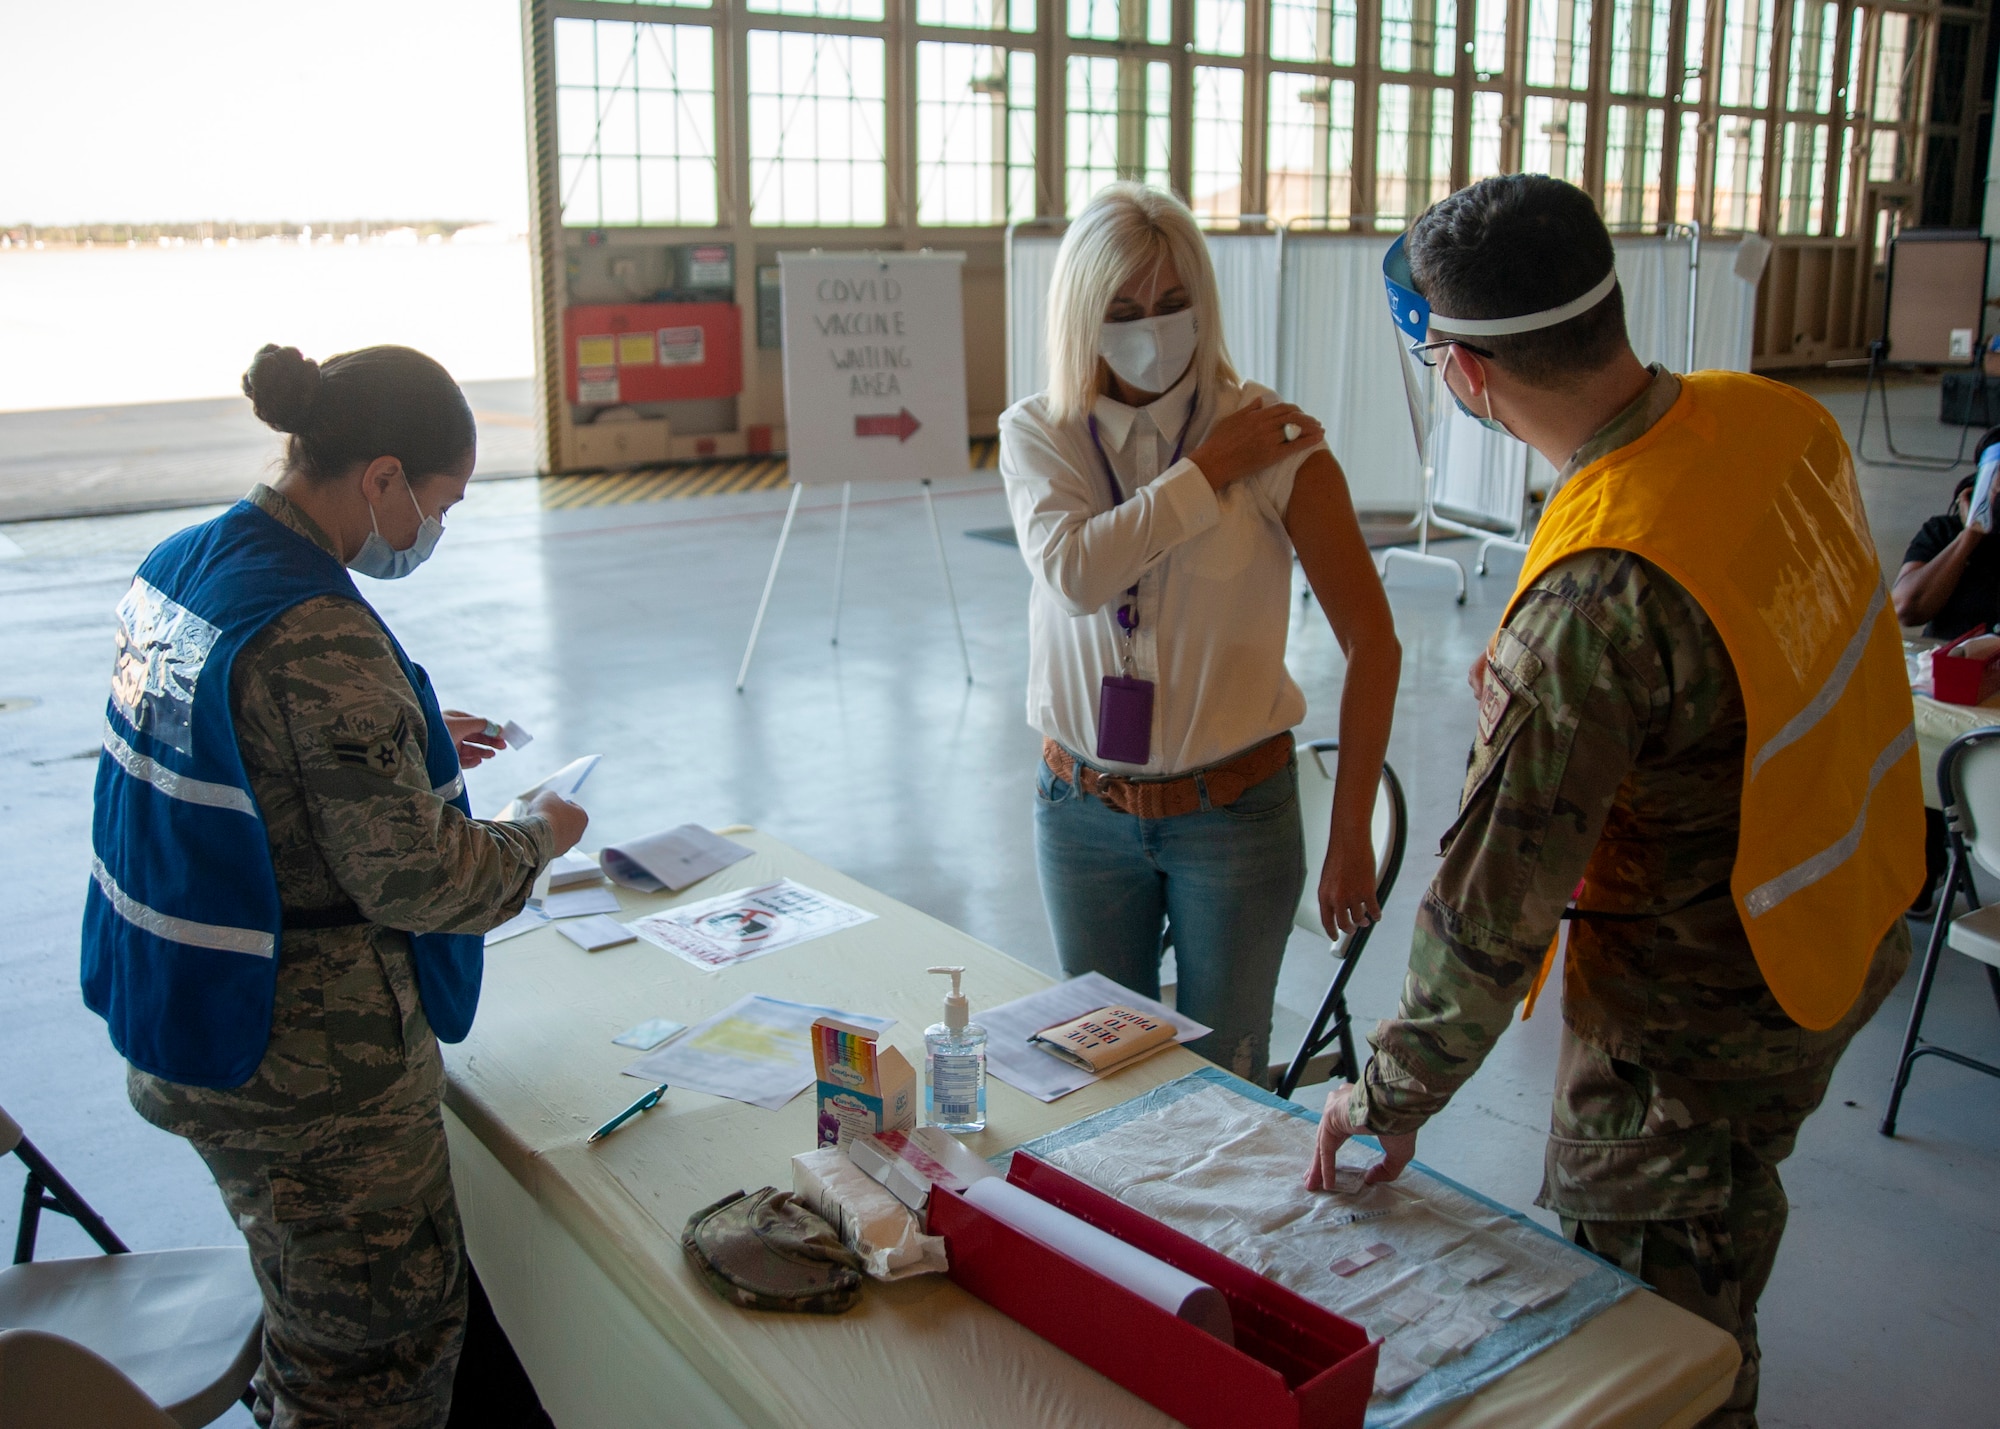 Iryiva Bazaria, a member of Team MacDill, prepares to receive a vaccination at a COVID-19 vaccination distribution site, located on MacDill Air Force Base, Fla., March 12, 2021. The vaccine was first offered to medical personnel, firefighters, security forces personnel and all first responders stationed at MacDill. (U.S. Air Force photo by Airman 1st Class David D. McLoney)